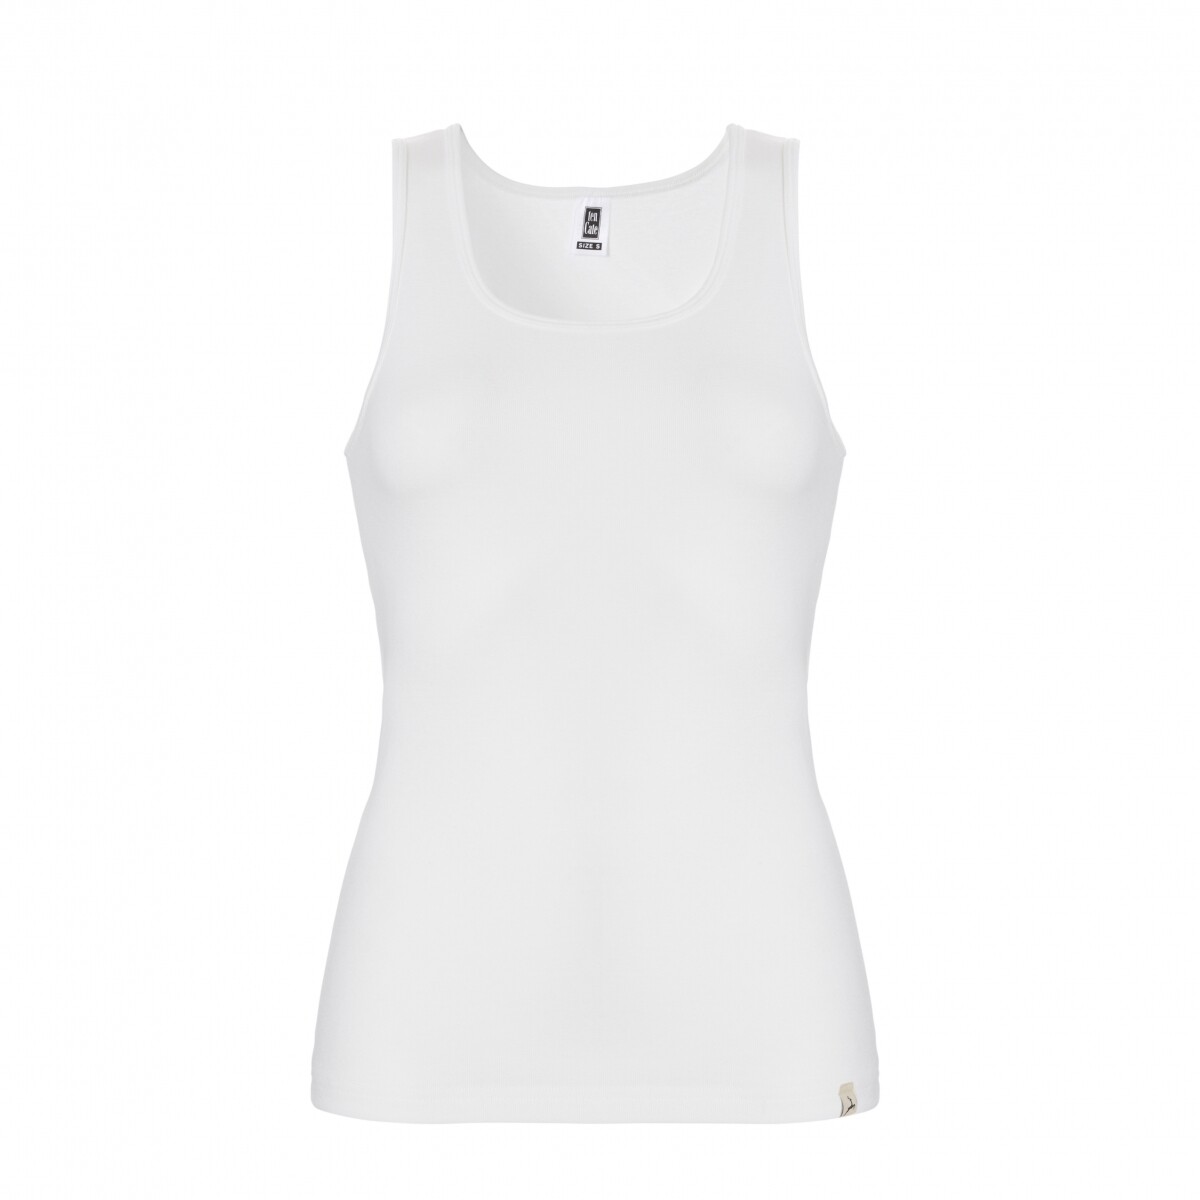 Ten Cate Thermo women singlet, Size: S